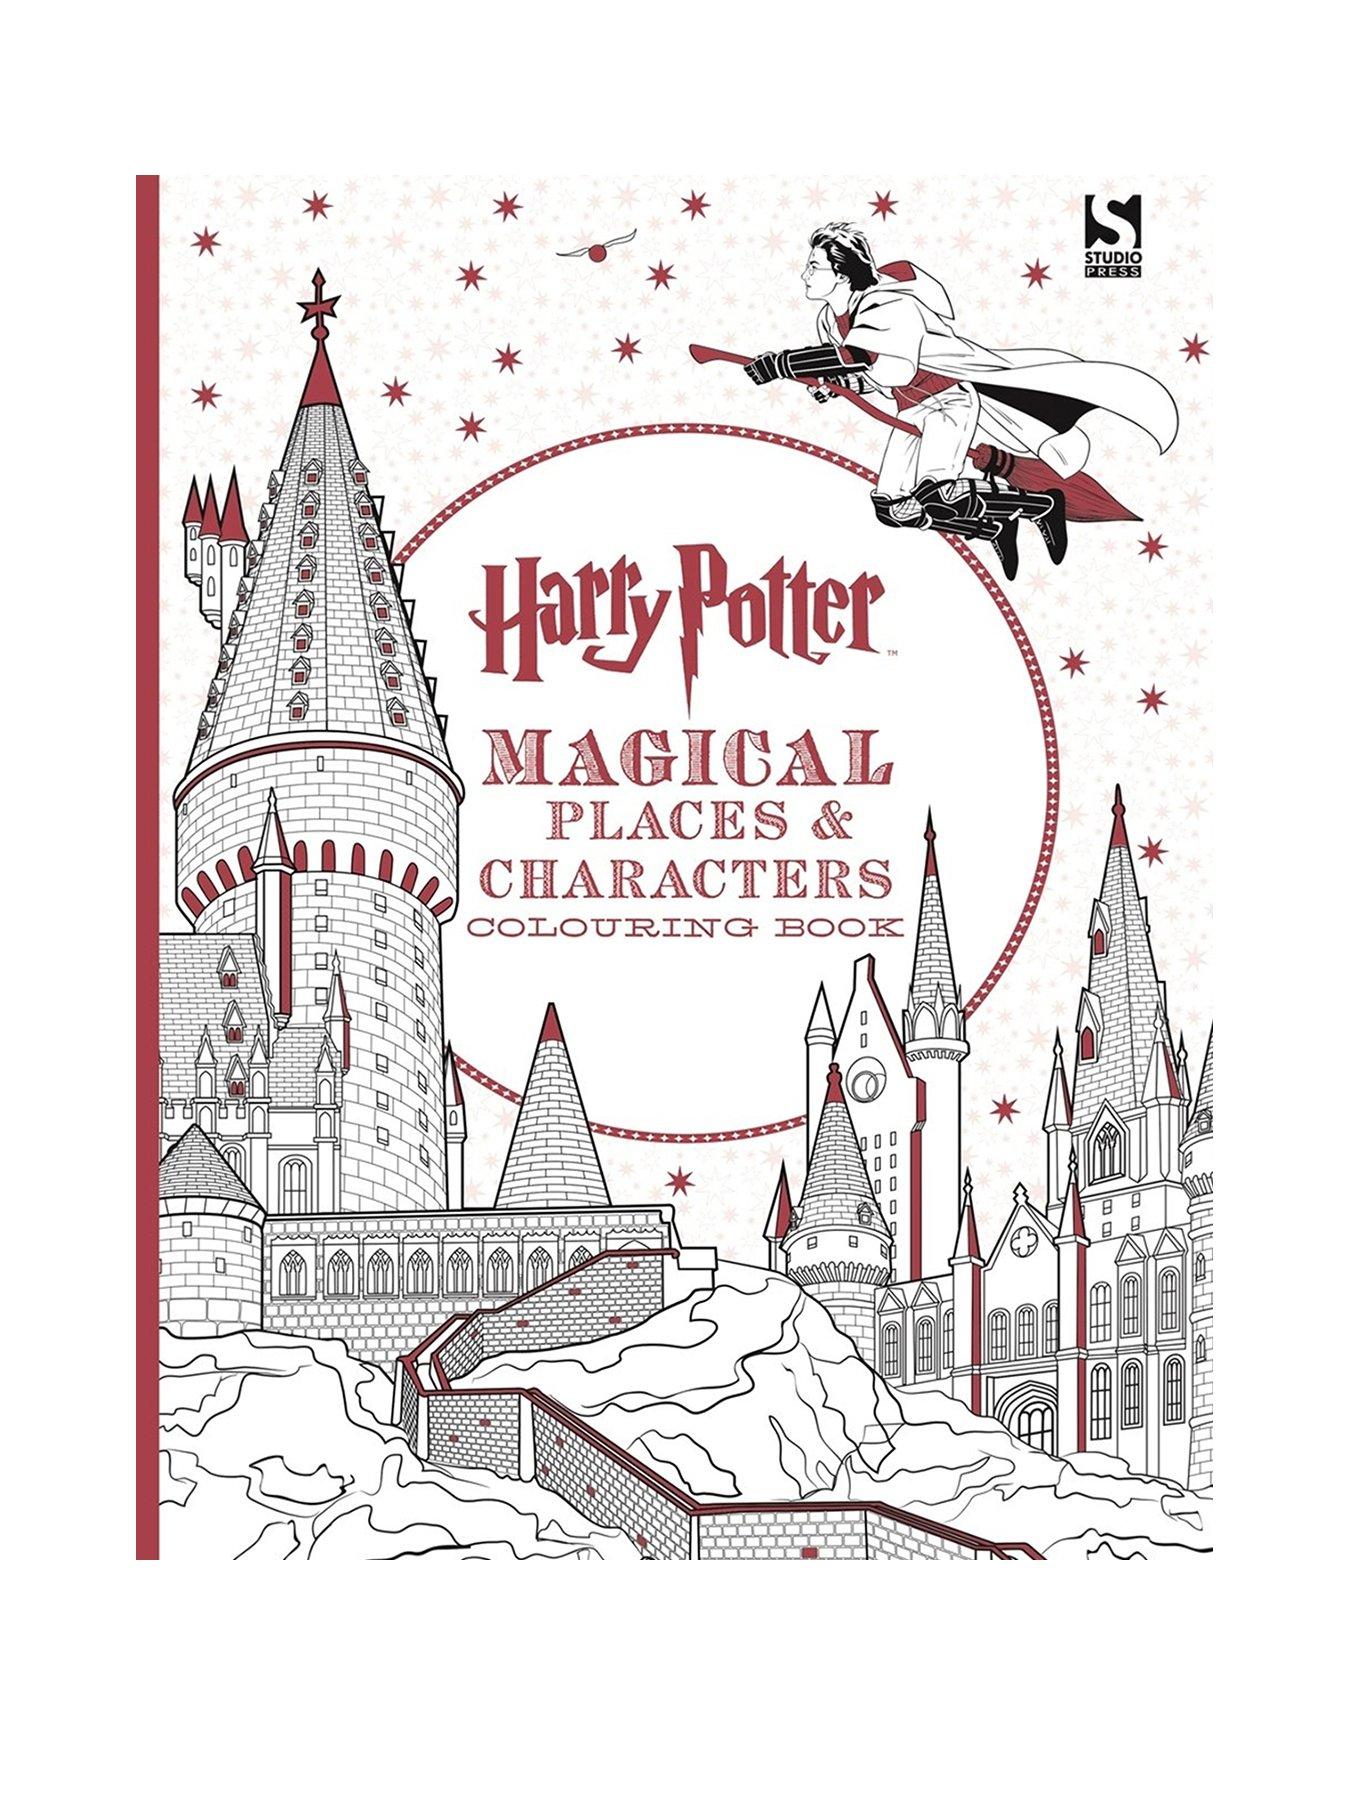 Now, Harry Potter colouring books for adults to beat some stress